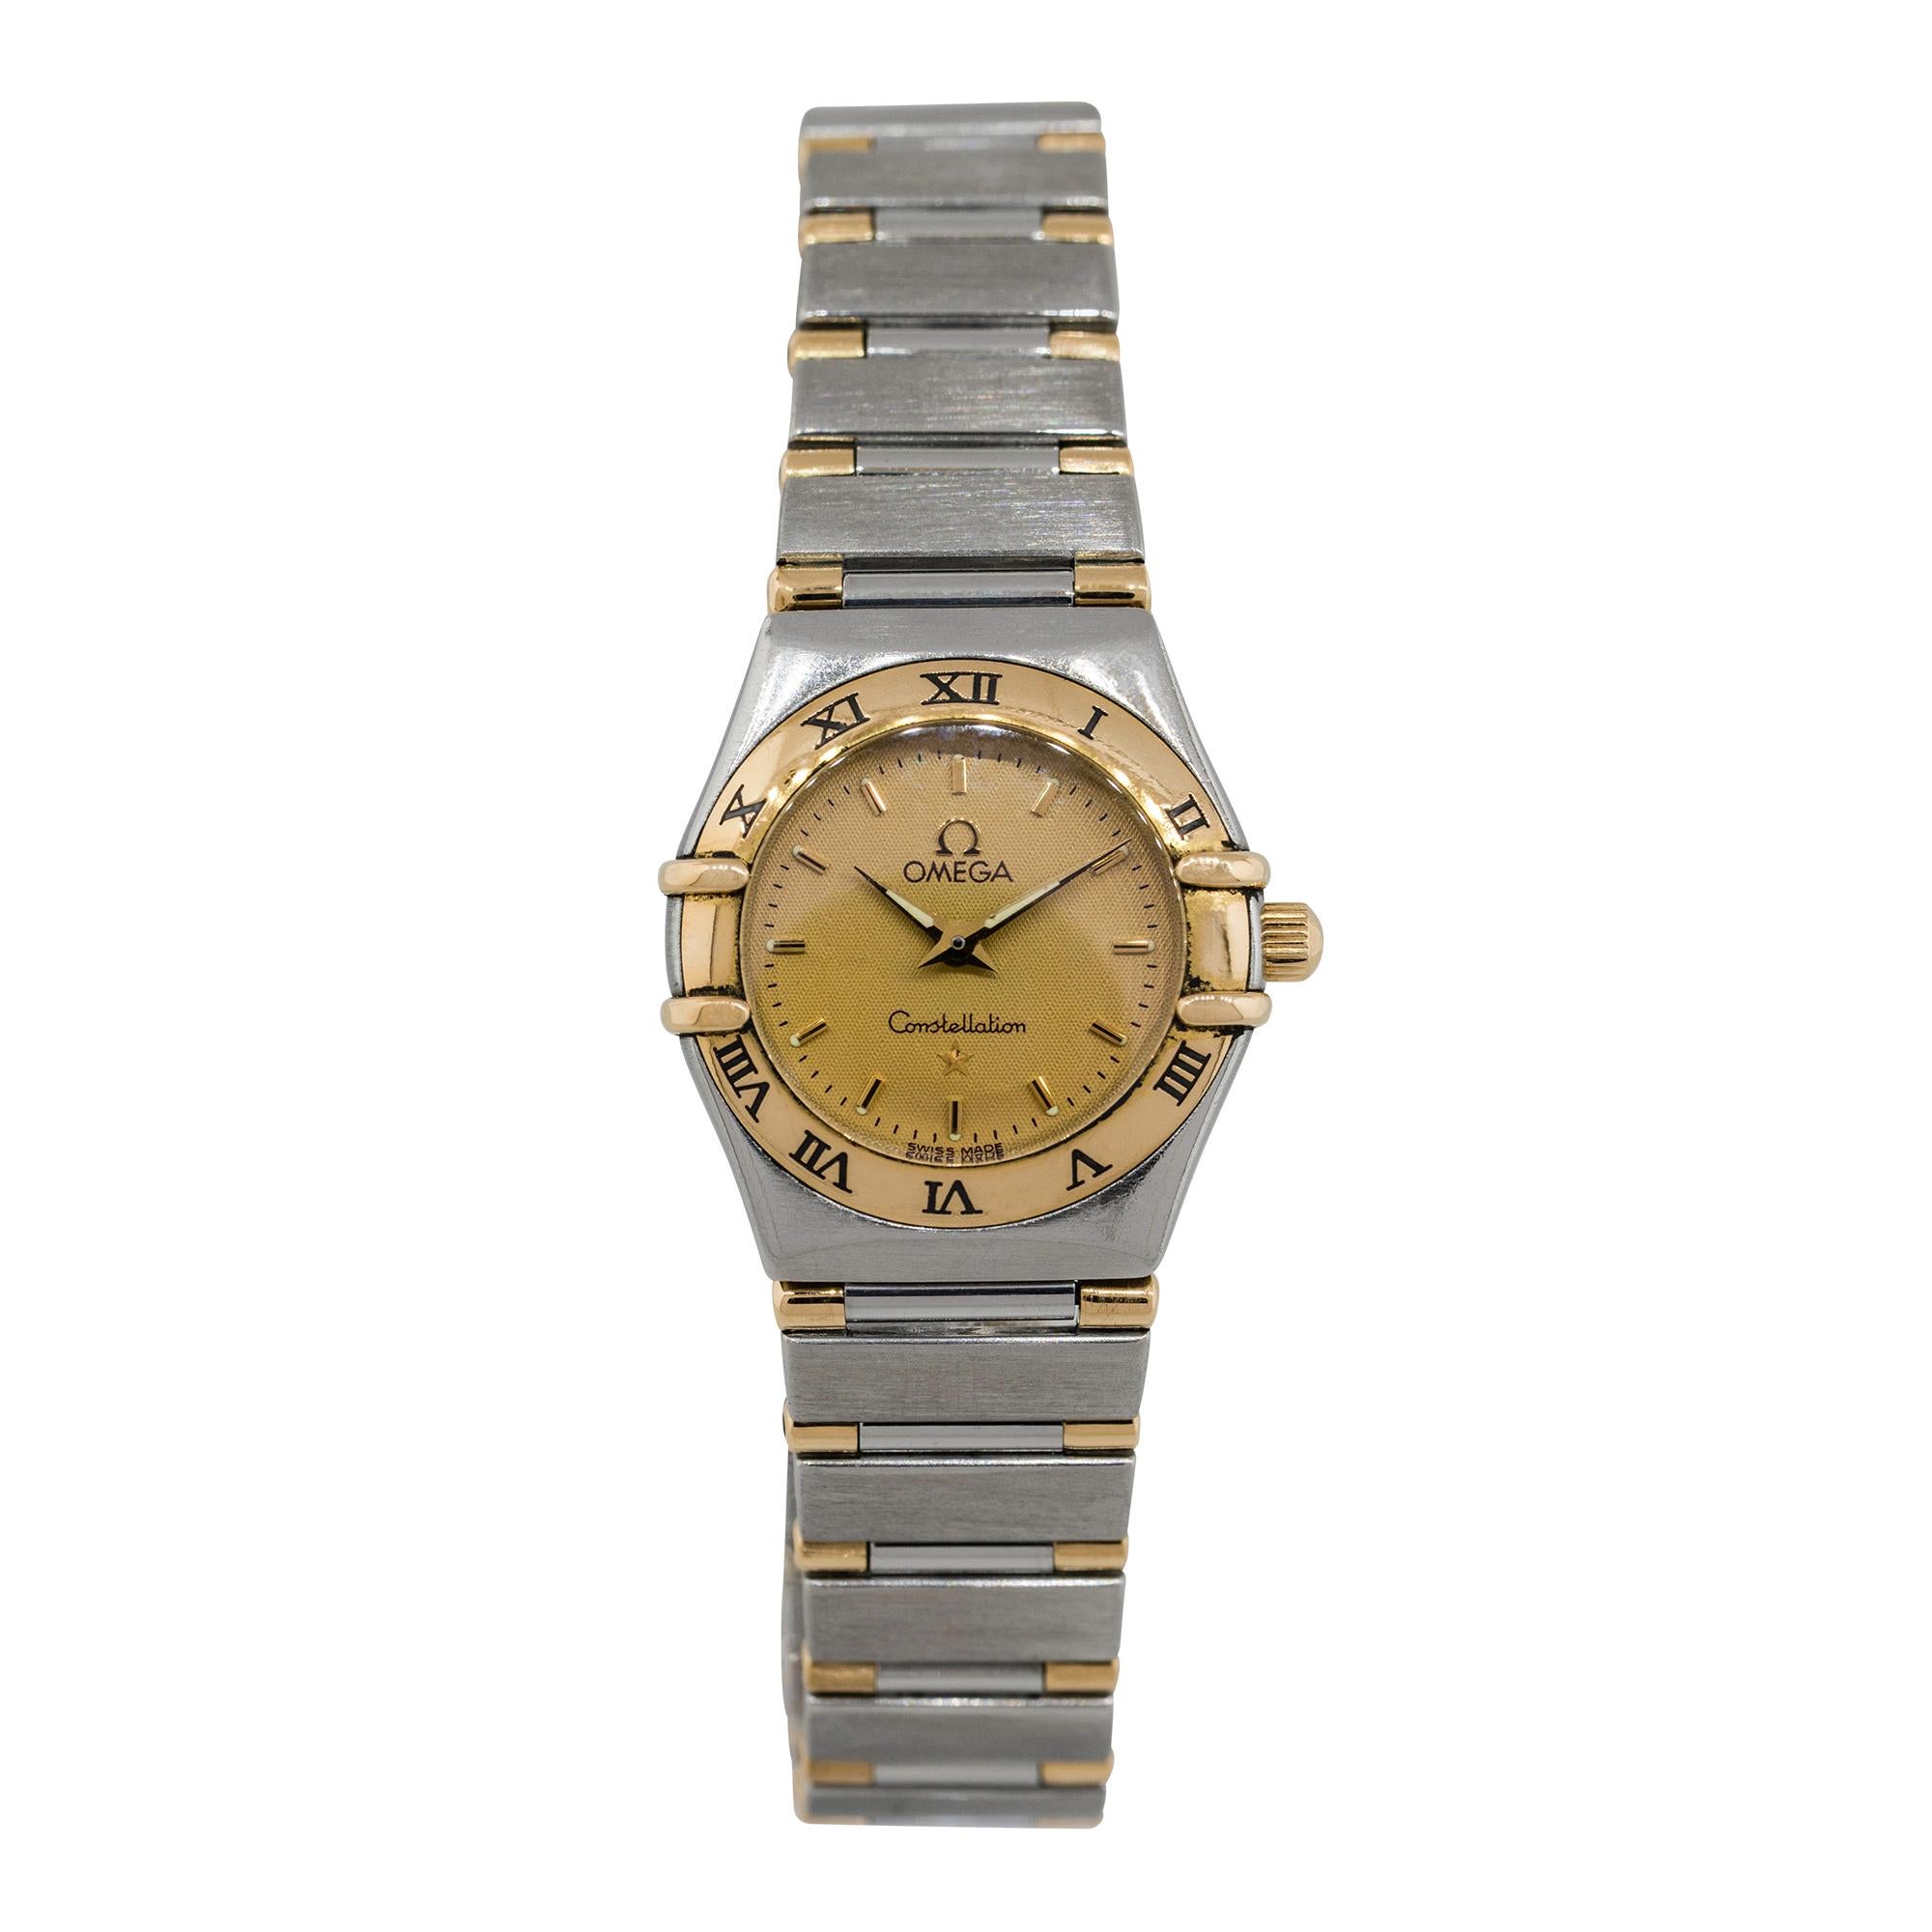 Brand: Omega
MPN: 55218506
Model: Constellation 
Case Material: Stainless steel
Crystal: Sapphire crystal
Bezel: Fixed 18k yellow gold roman numeral bezel
Dial: Gold dial with gold hour markers and hands.
Bracelet: Two tone link Bracelet
Case Size: